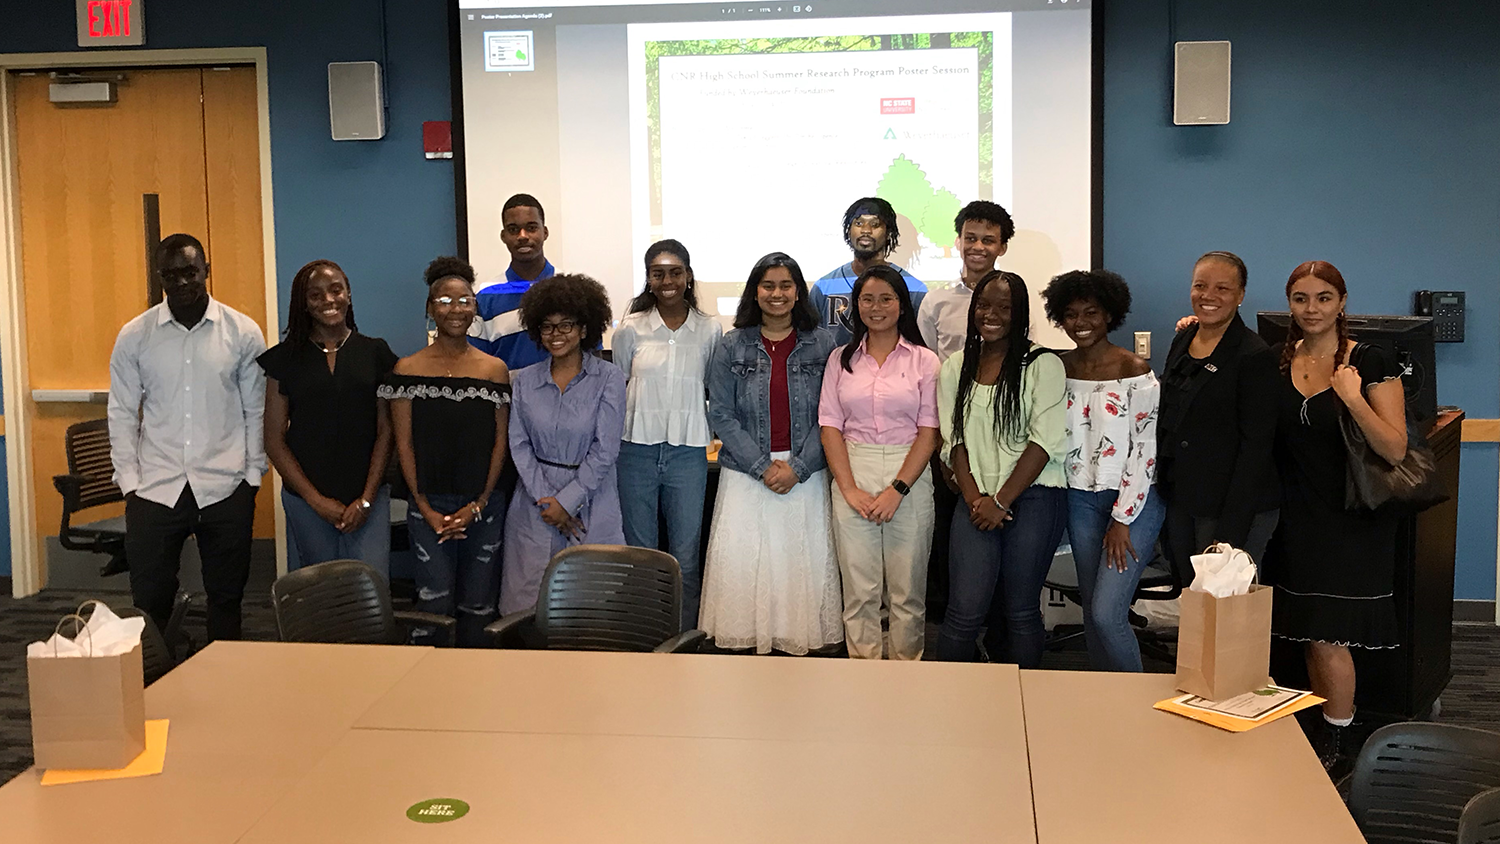 NC State professor Zakiya Leggett poses with the participants of the research program - Summer Program Exposes High School Students to Forestry - College of Natural Resources - NC State University